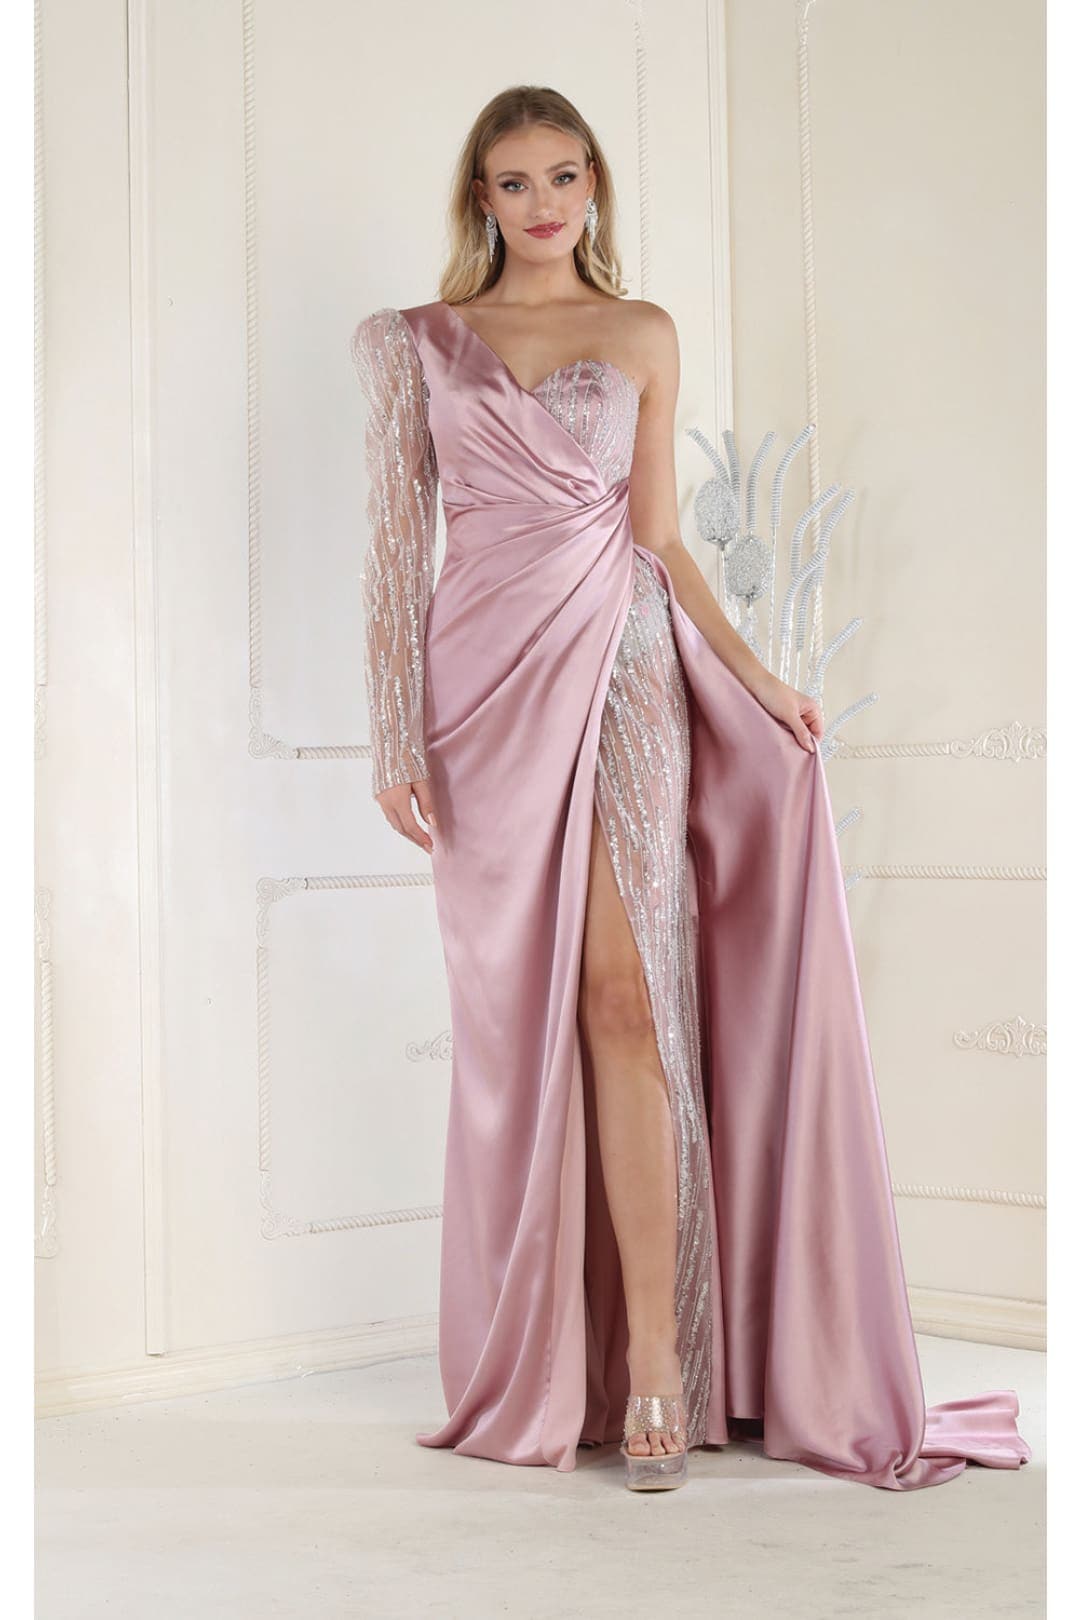 Royal Queen RQ7980 High Slit Embellished Evening Gown - DUSTY ROSE / 4 - Dress